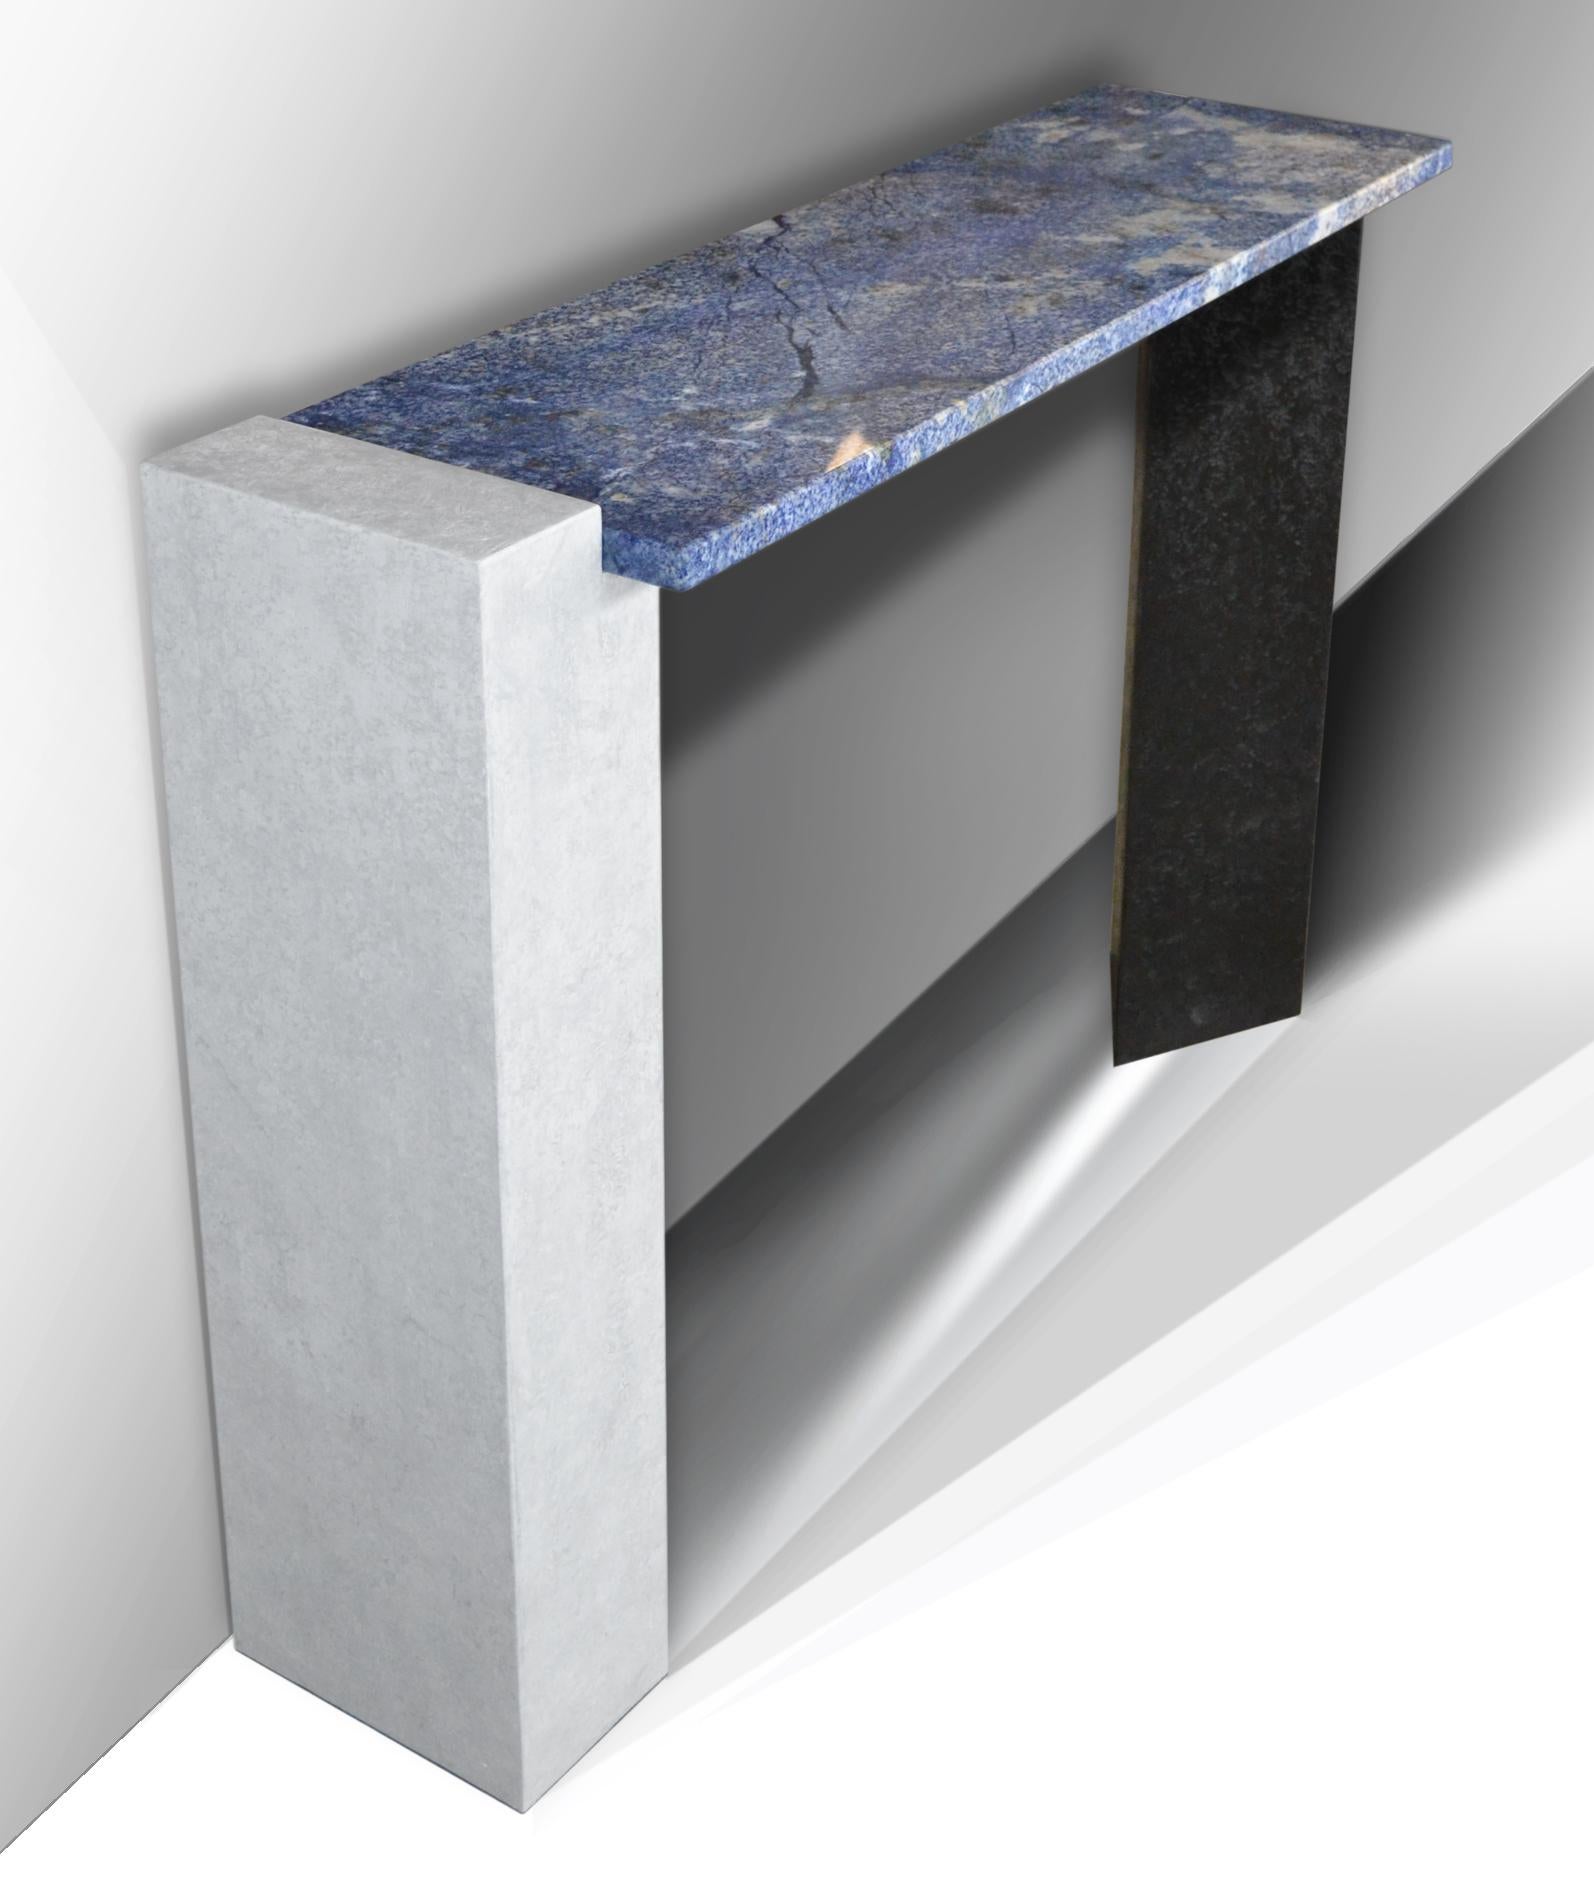 Modern Consolle Azul Bahia Granite Top and Textured Wooden Legs .
Cupioli Collection modern console handcrafted in Italy by our skilled craftsmen with a pure architectural silhouette. Elegant contrast between the precious Azul Bahia granite top and